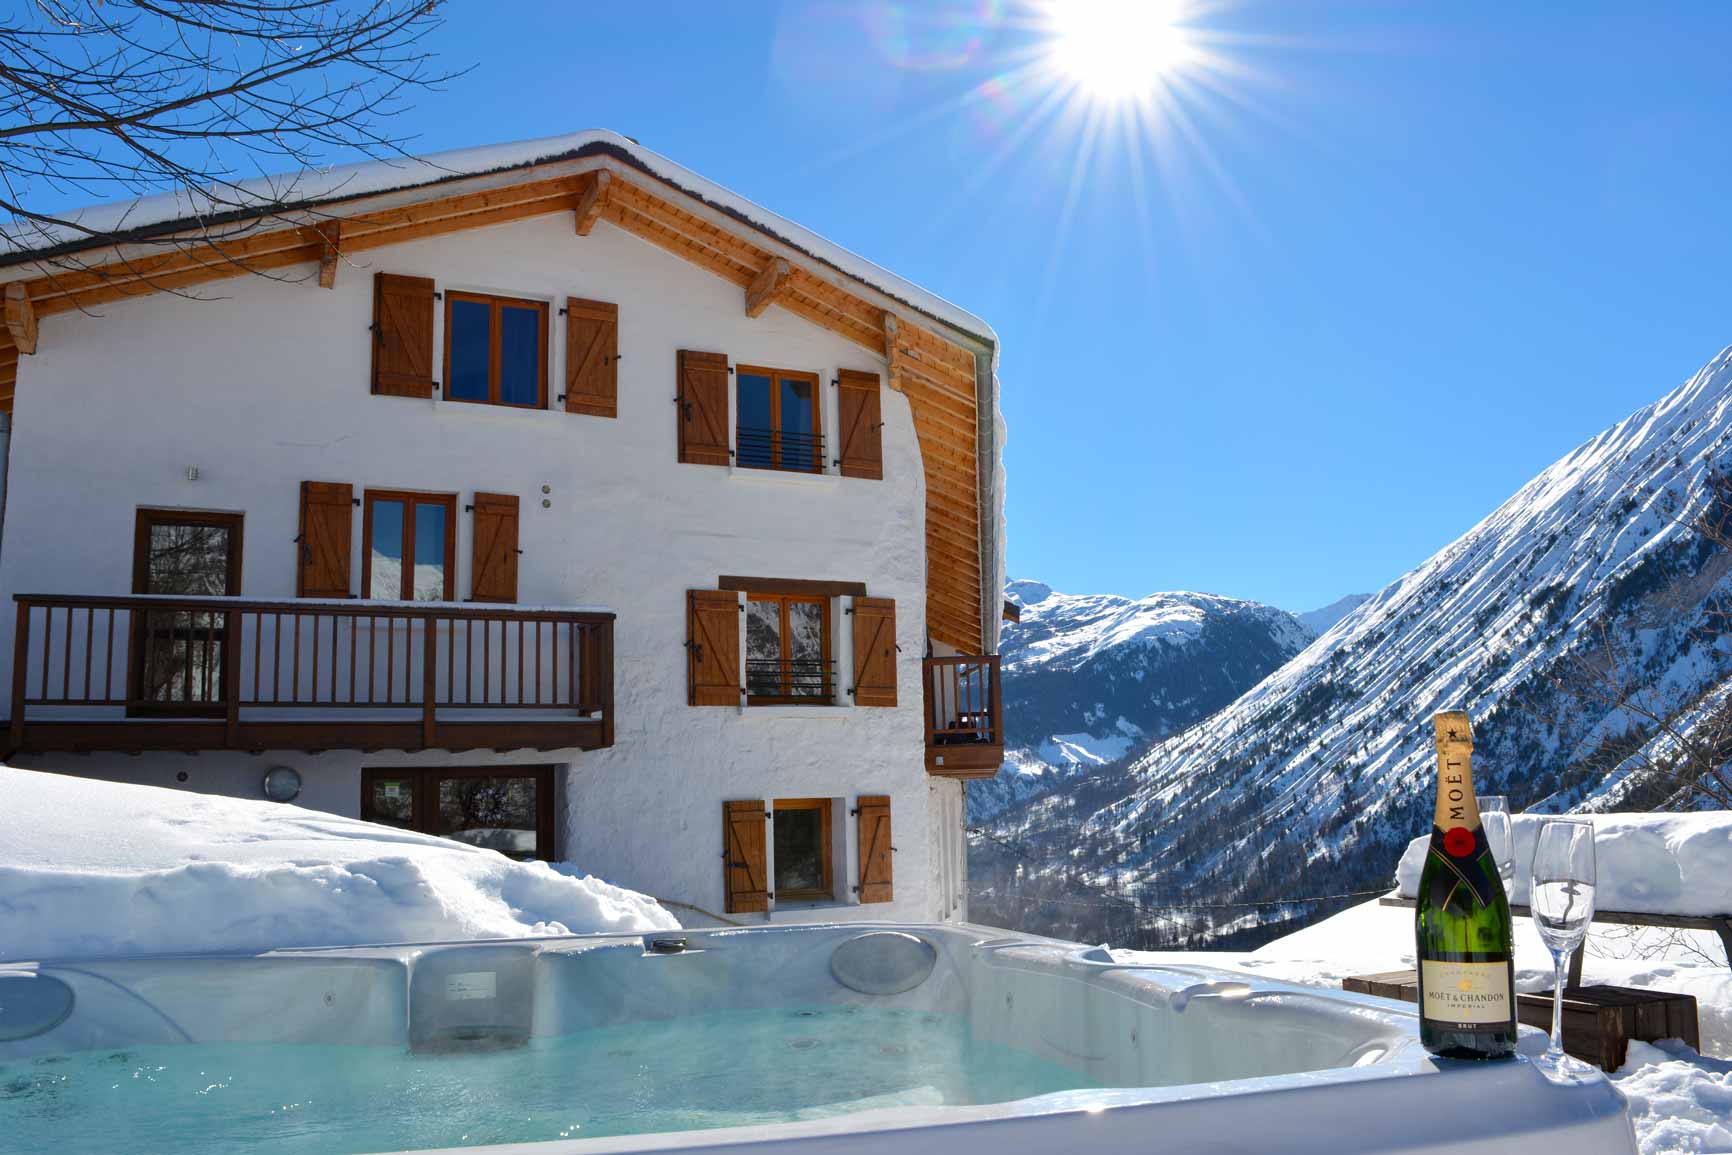 Chalet Broski - Our Luxury Self-Catered Chalet